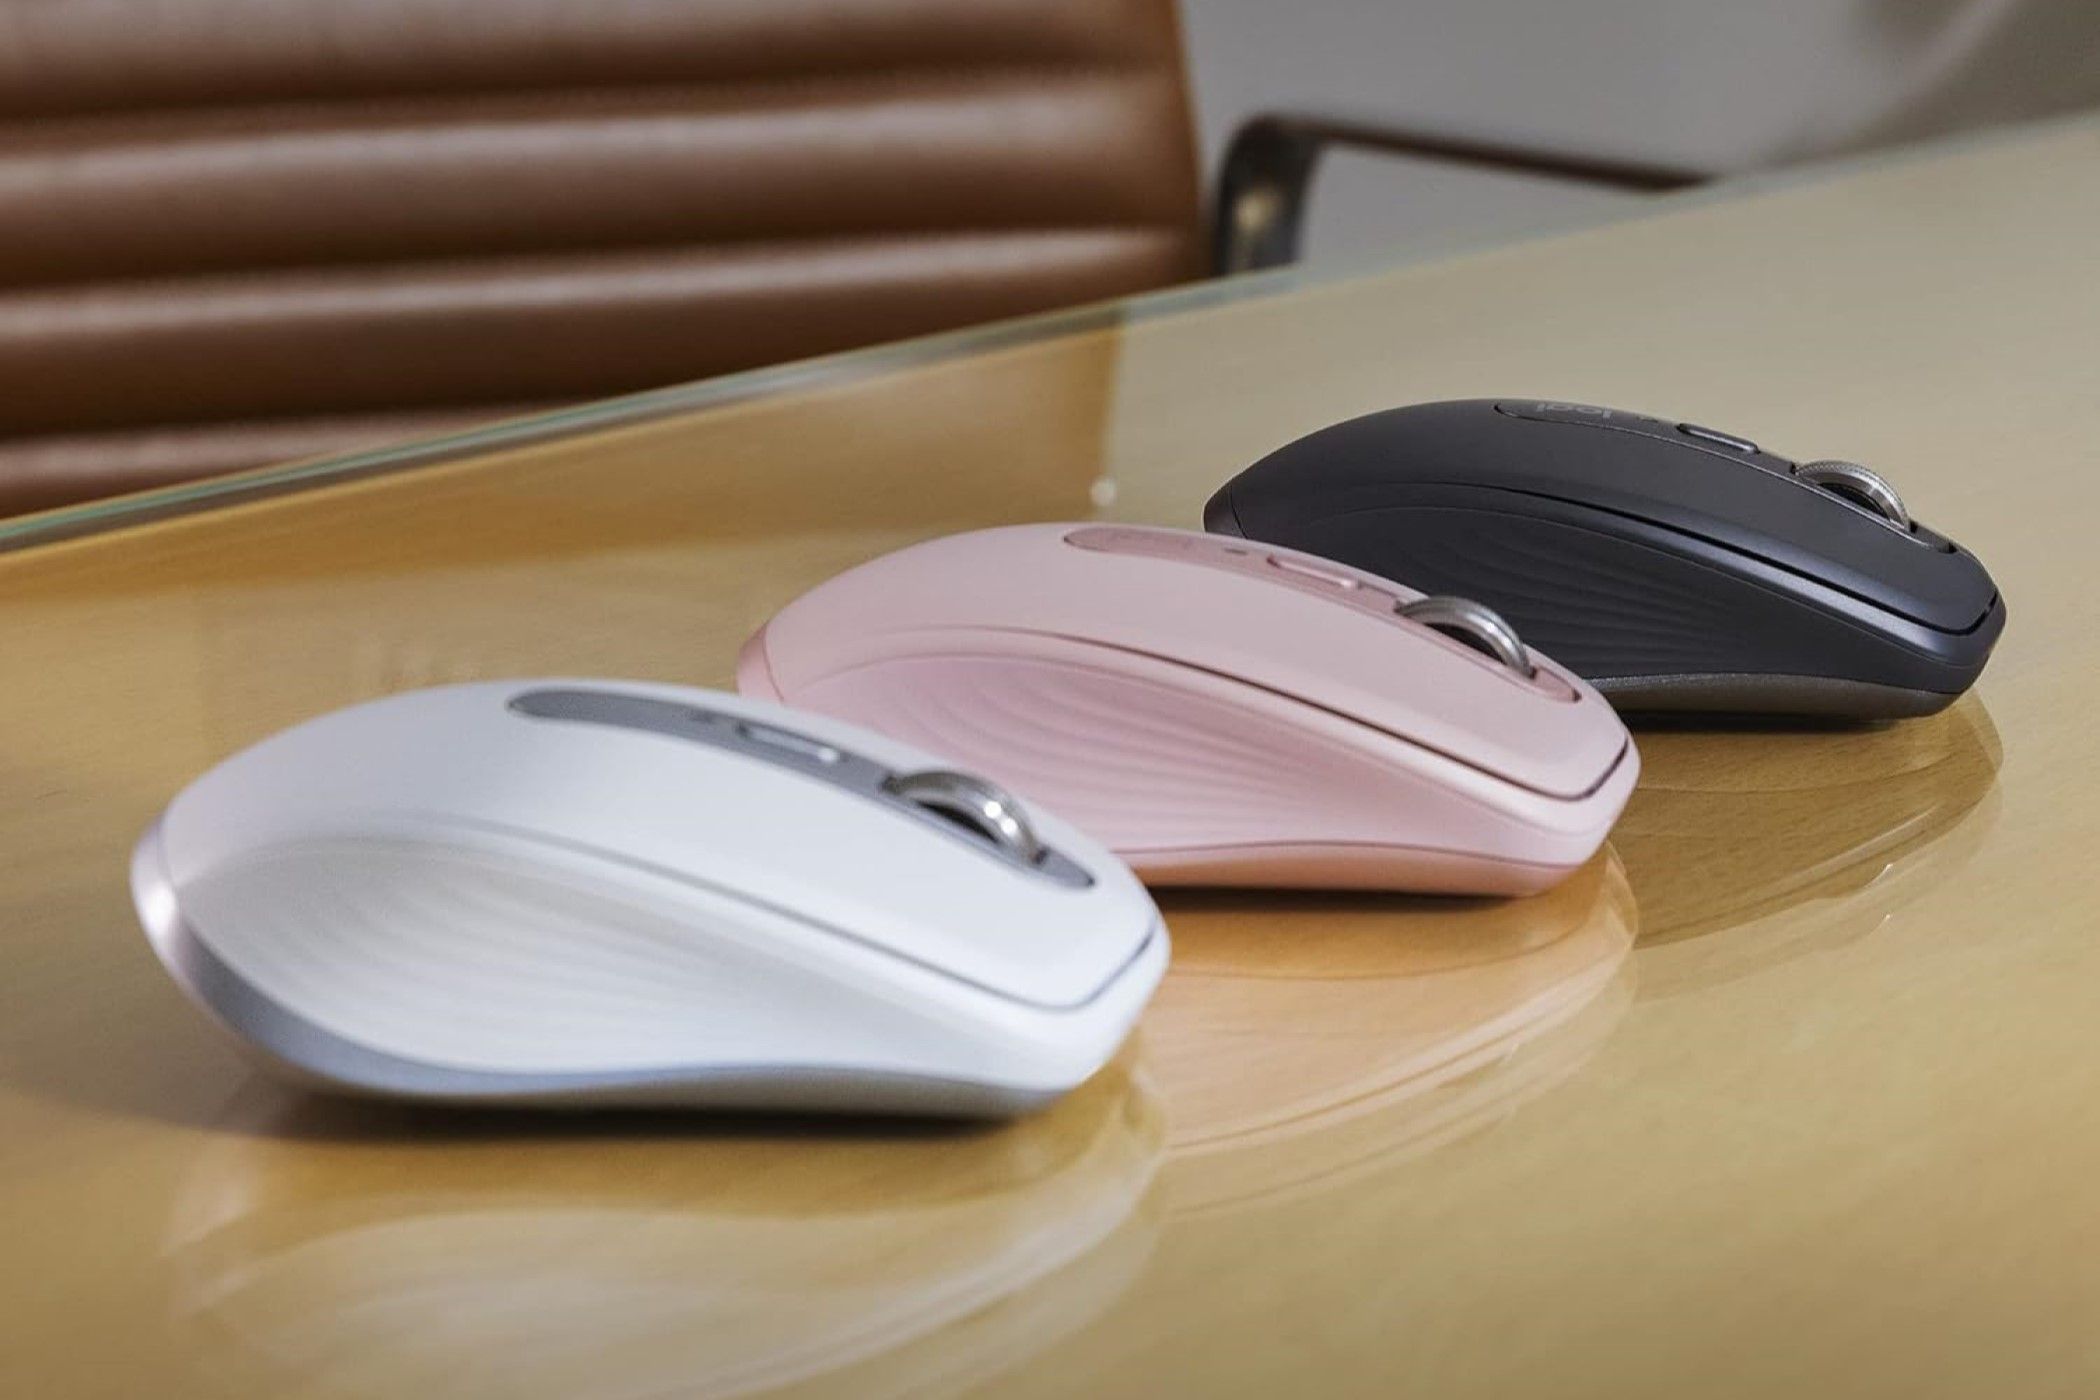 Three variants of the Logitech MX Anywhere 3S laying on a glass table